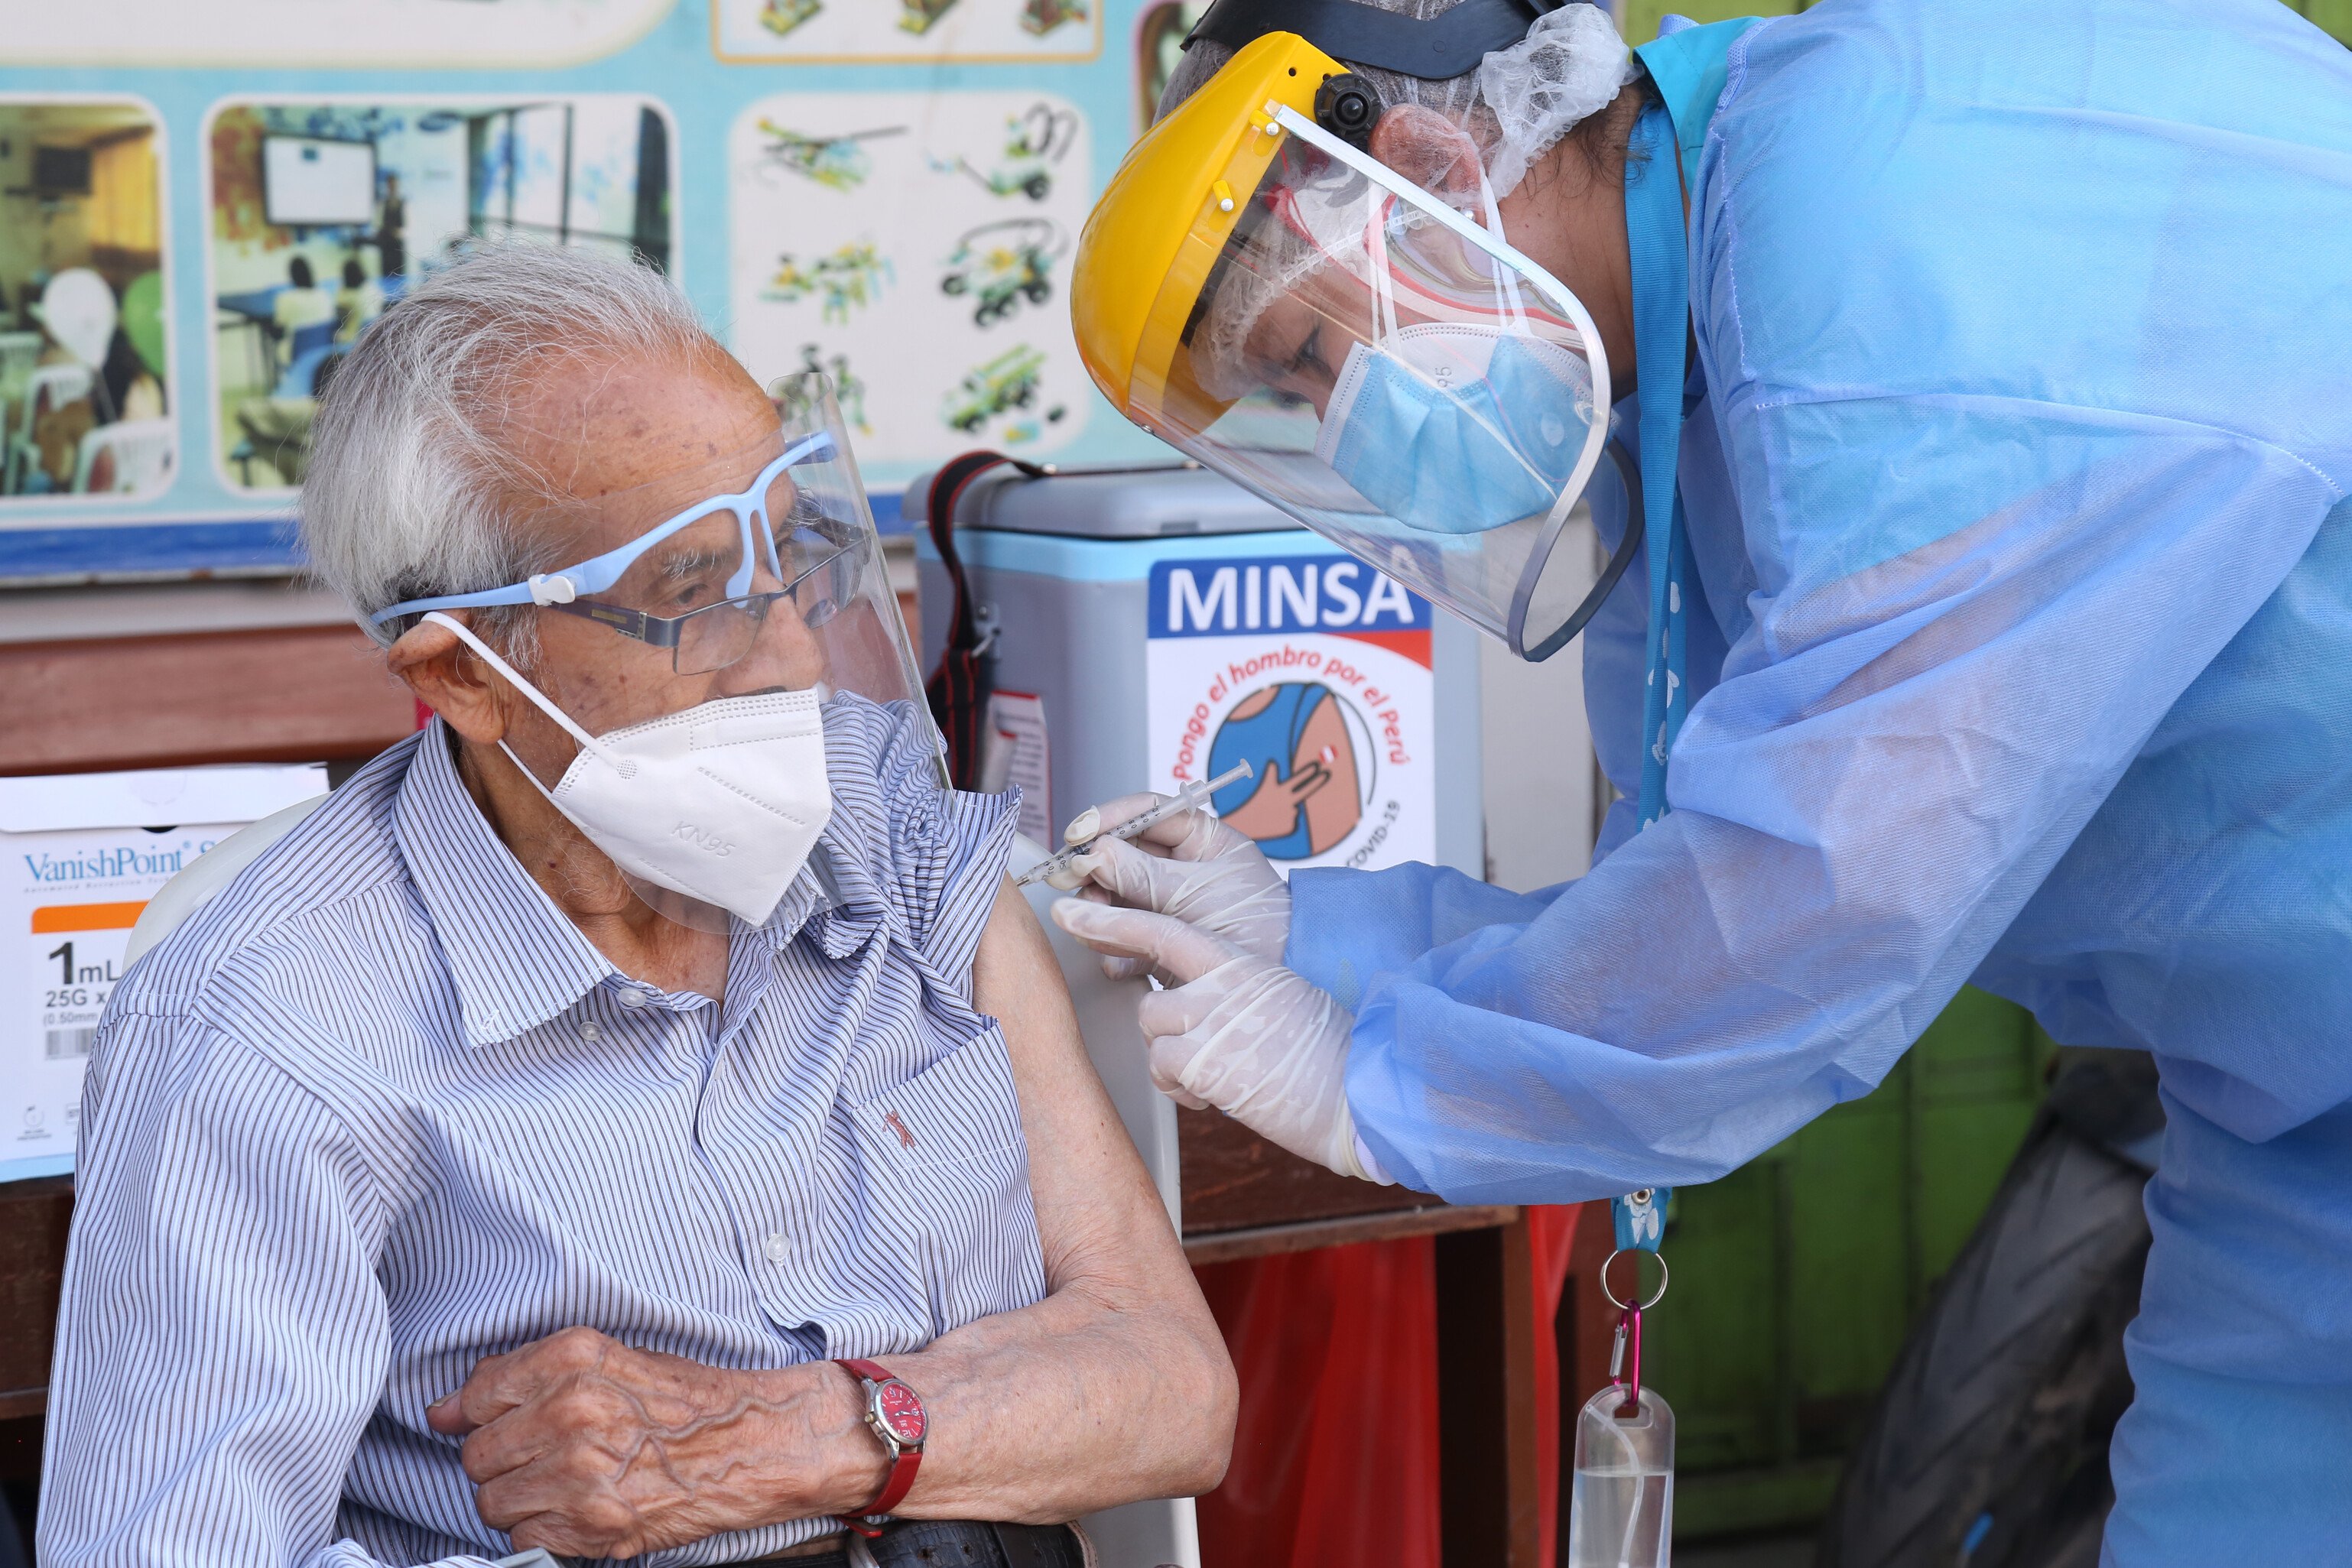 In Peru, a healthcare worker wearing PPE administers a Covid-19 vaccine to an older man wearing a mask and visor.